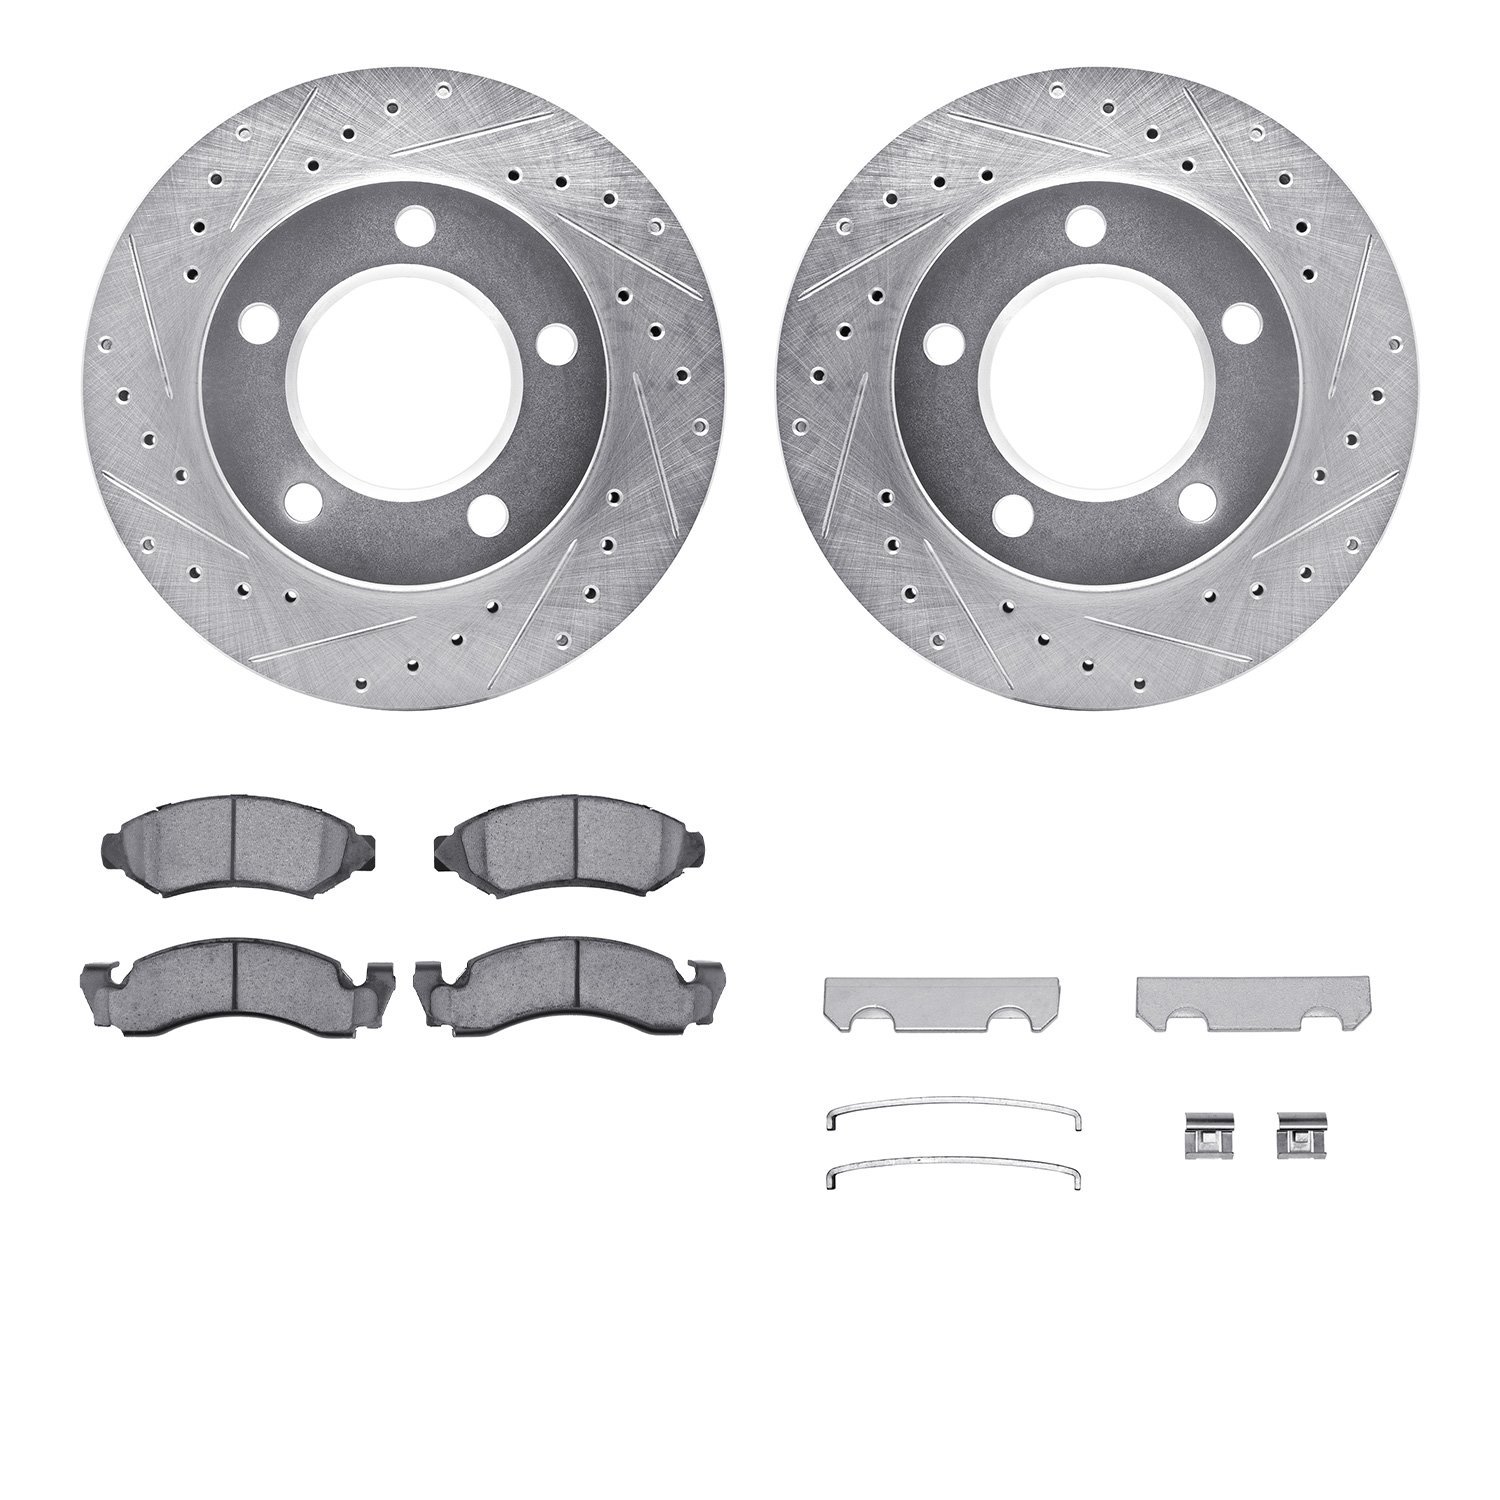 7412-42019 Drilled/Slotted Brake Rotors with Ultimate-Duty Brake Pads Kit & Hardware [Silver], 1978-1978 Mopar, Position: Front